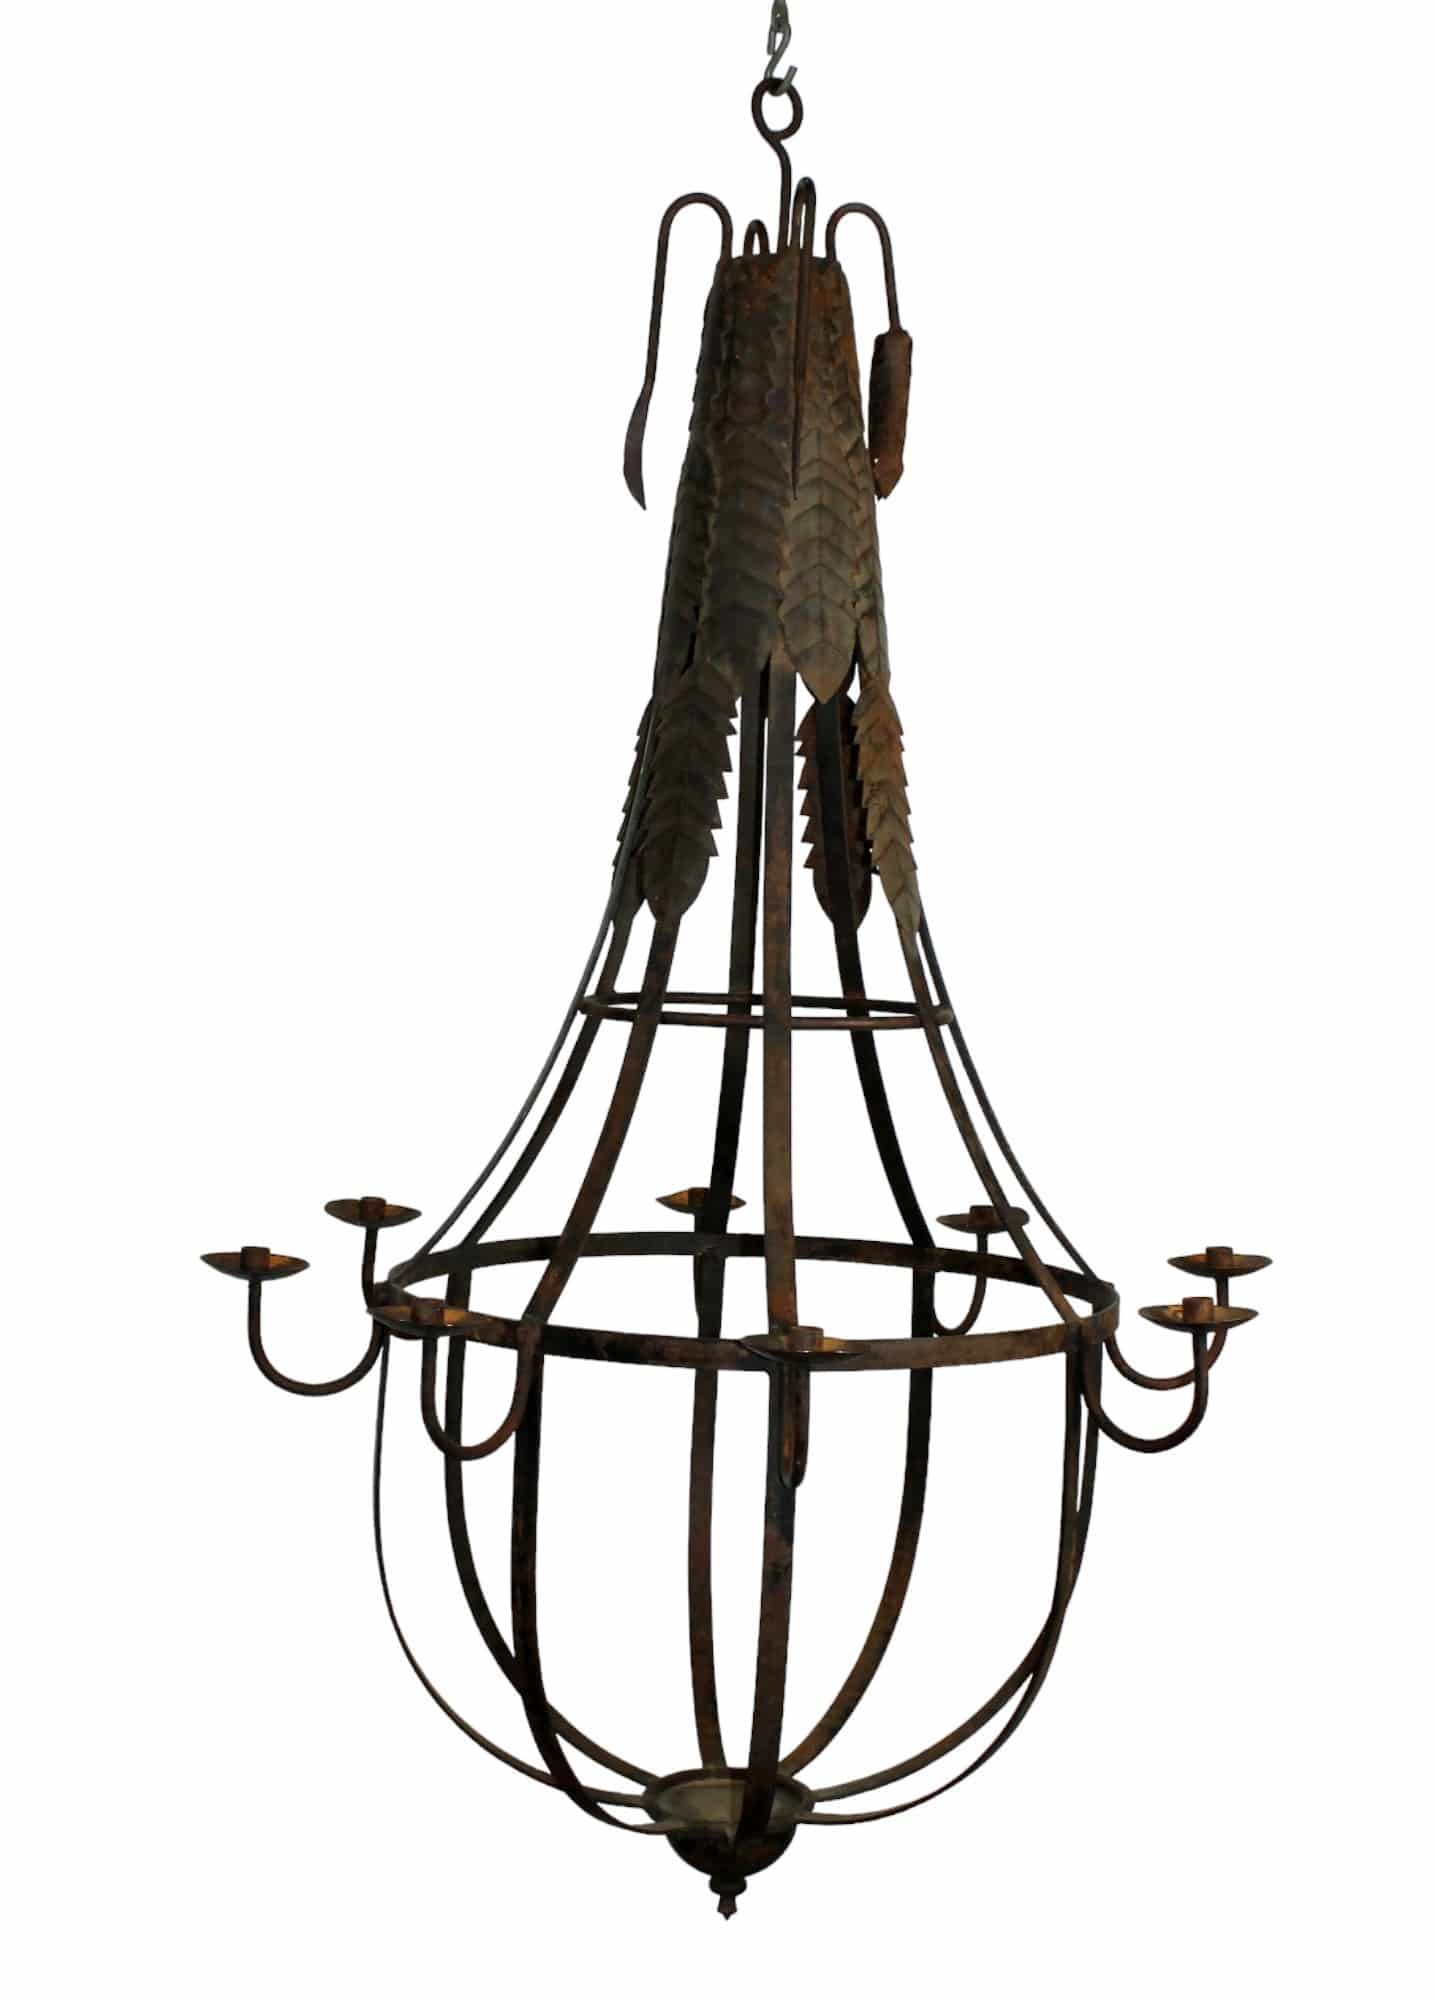 Iron basket form candle chandelier